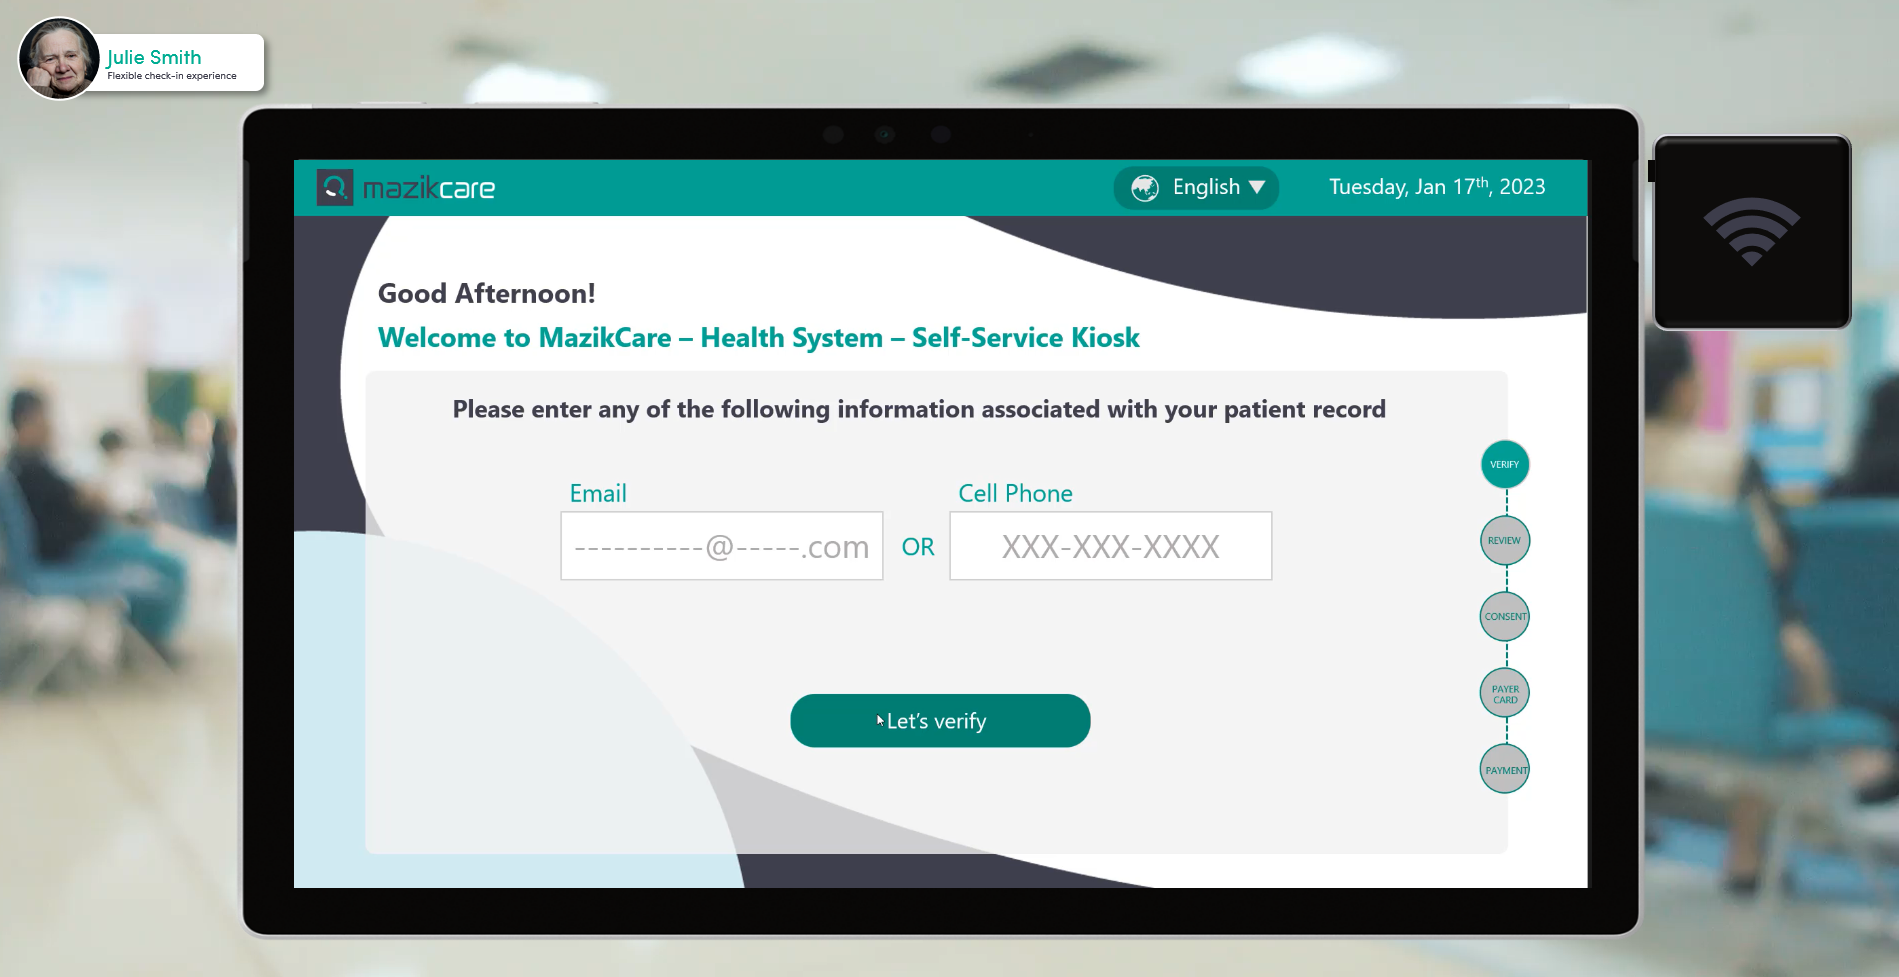 Patient self-service check-in